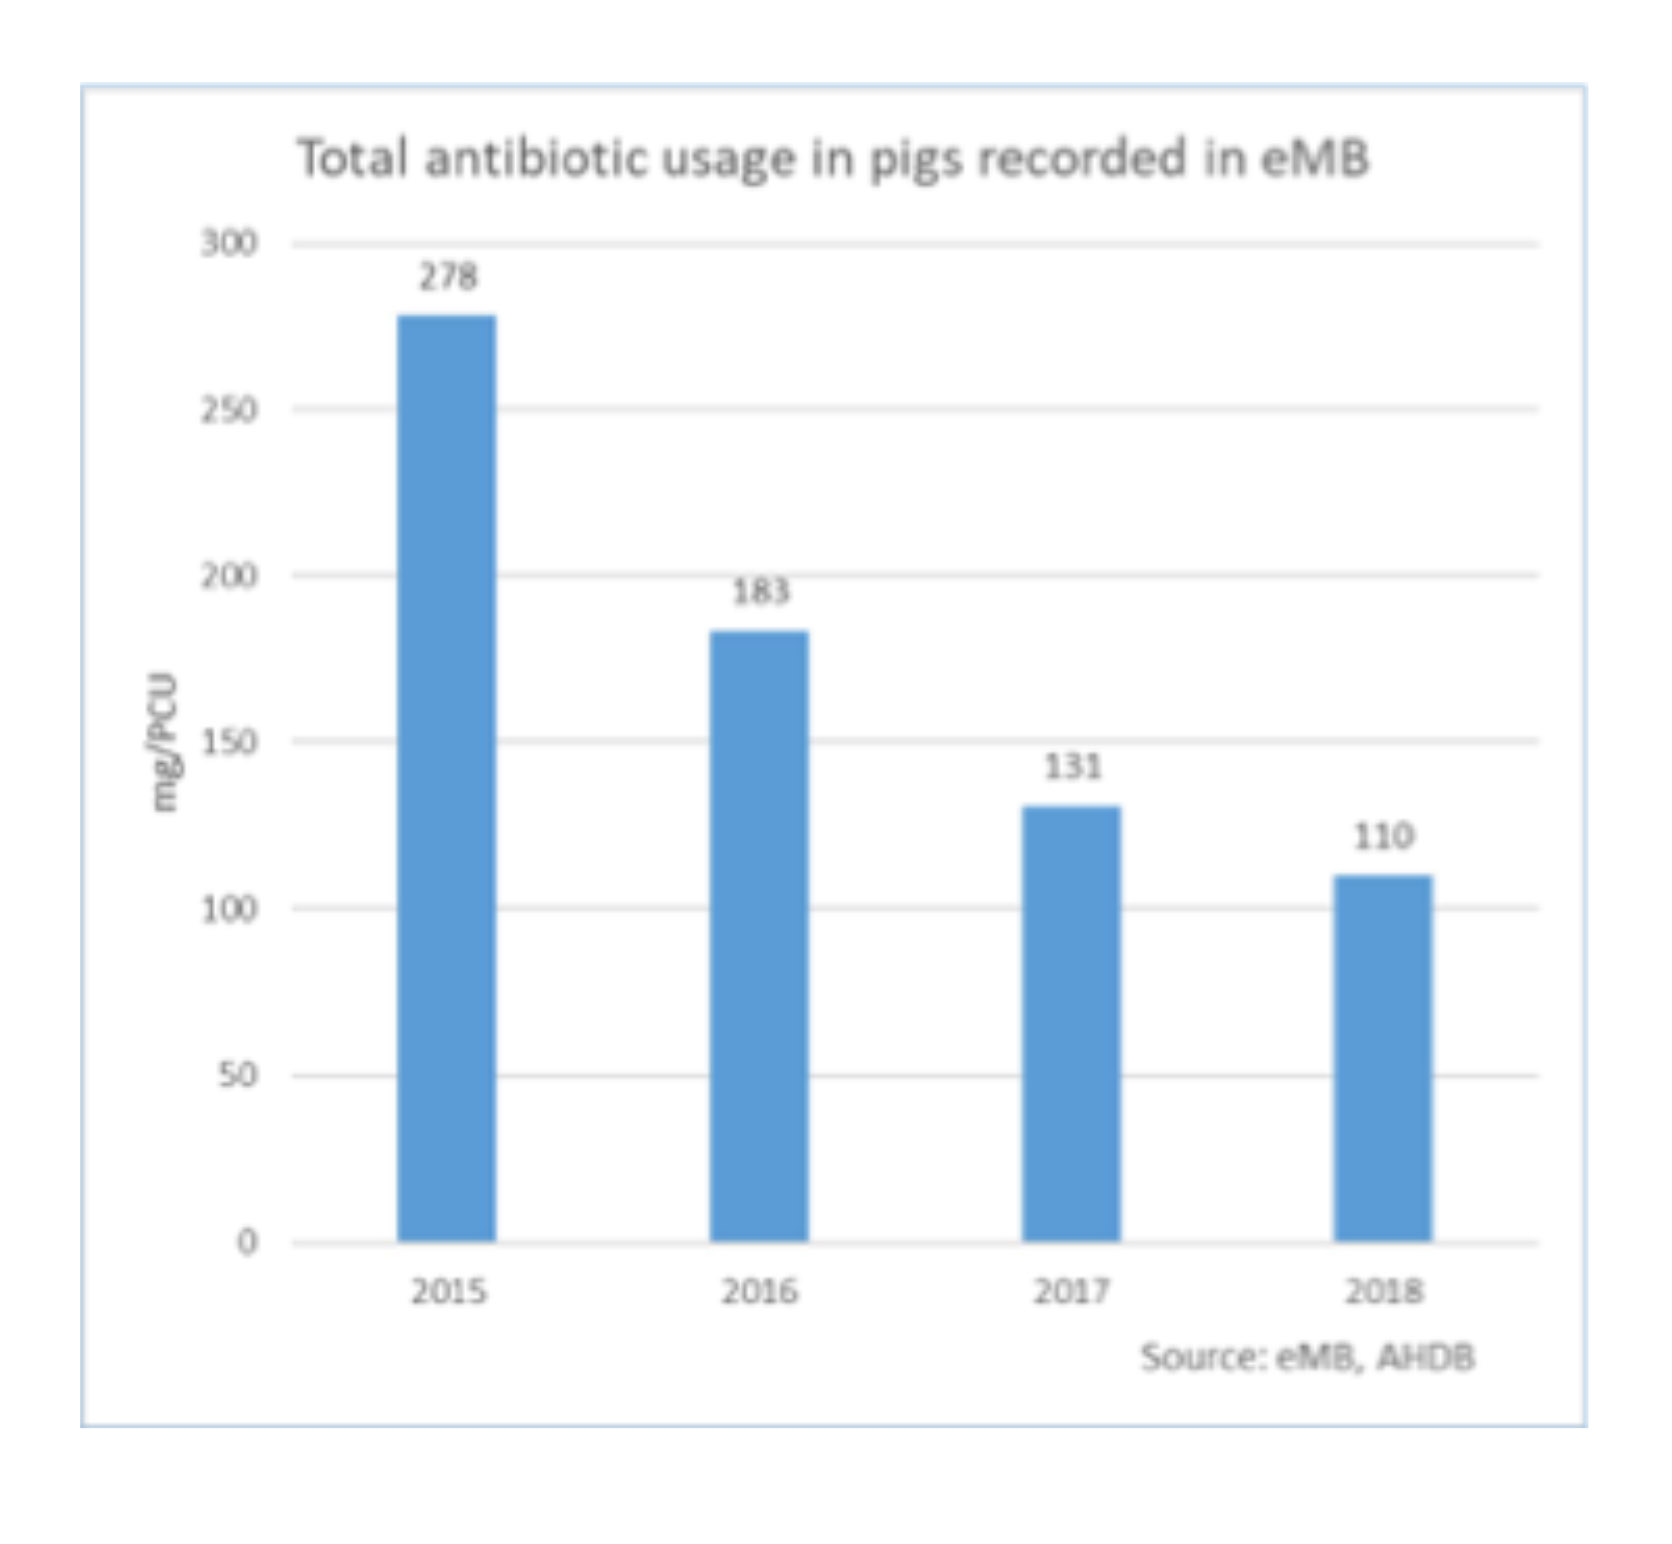 Total antibiotic usage in pigs recorded in eMB